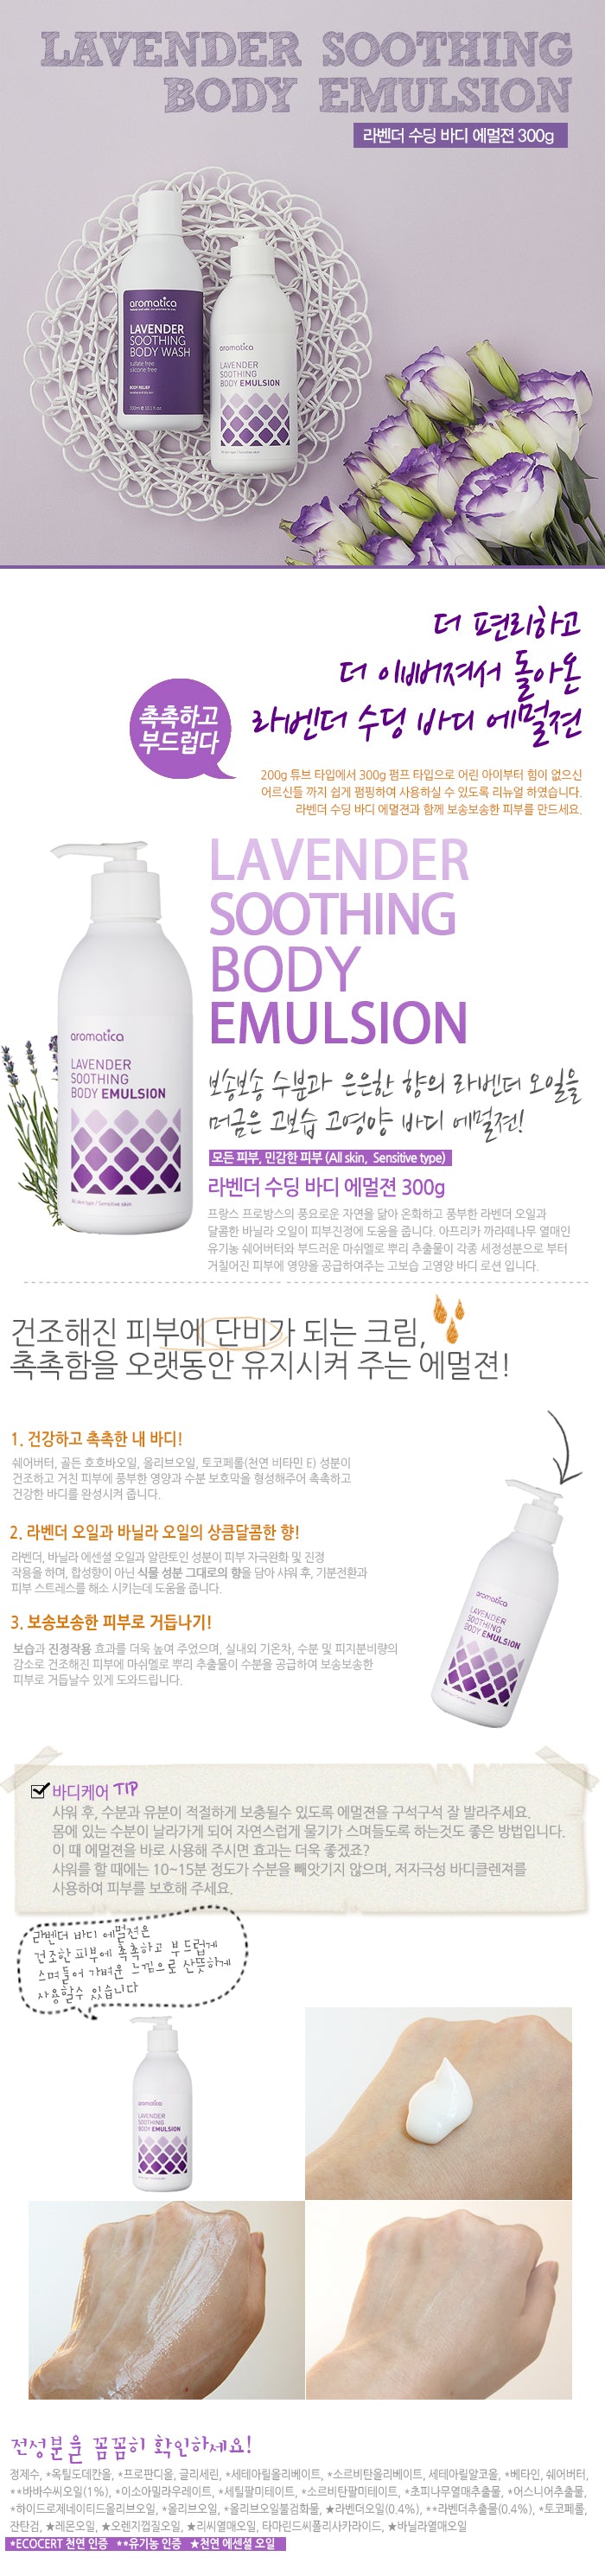 Aromatica – Lavender Soothing Body Emulsion